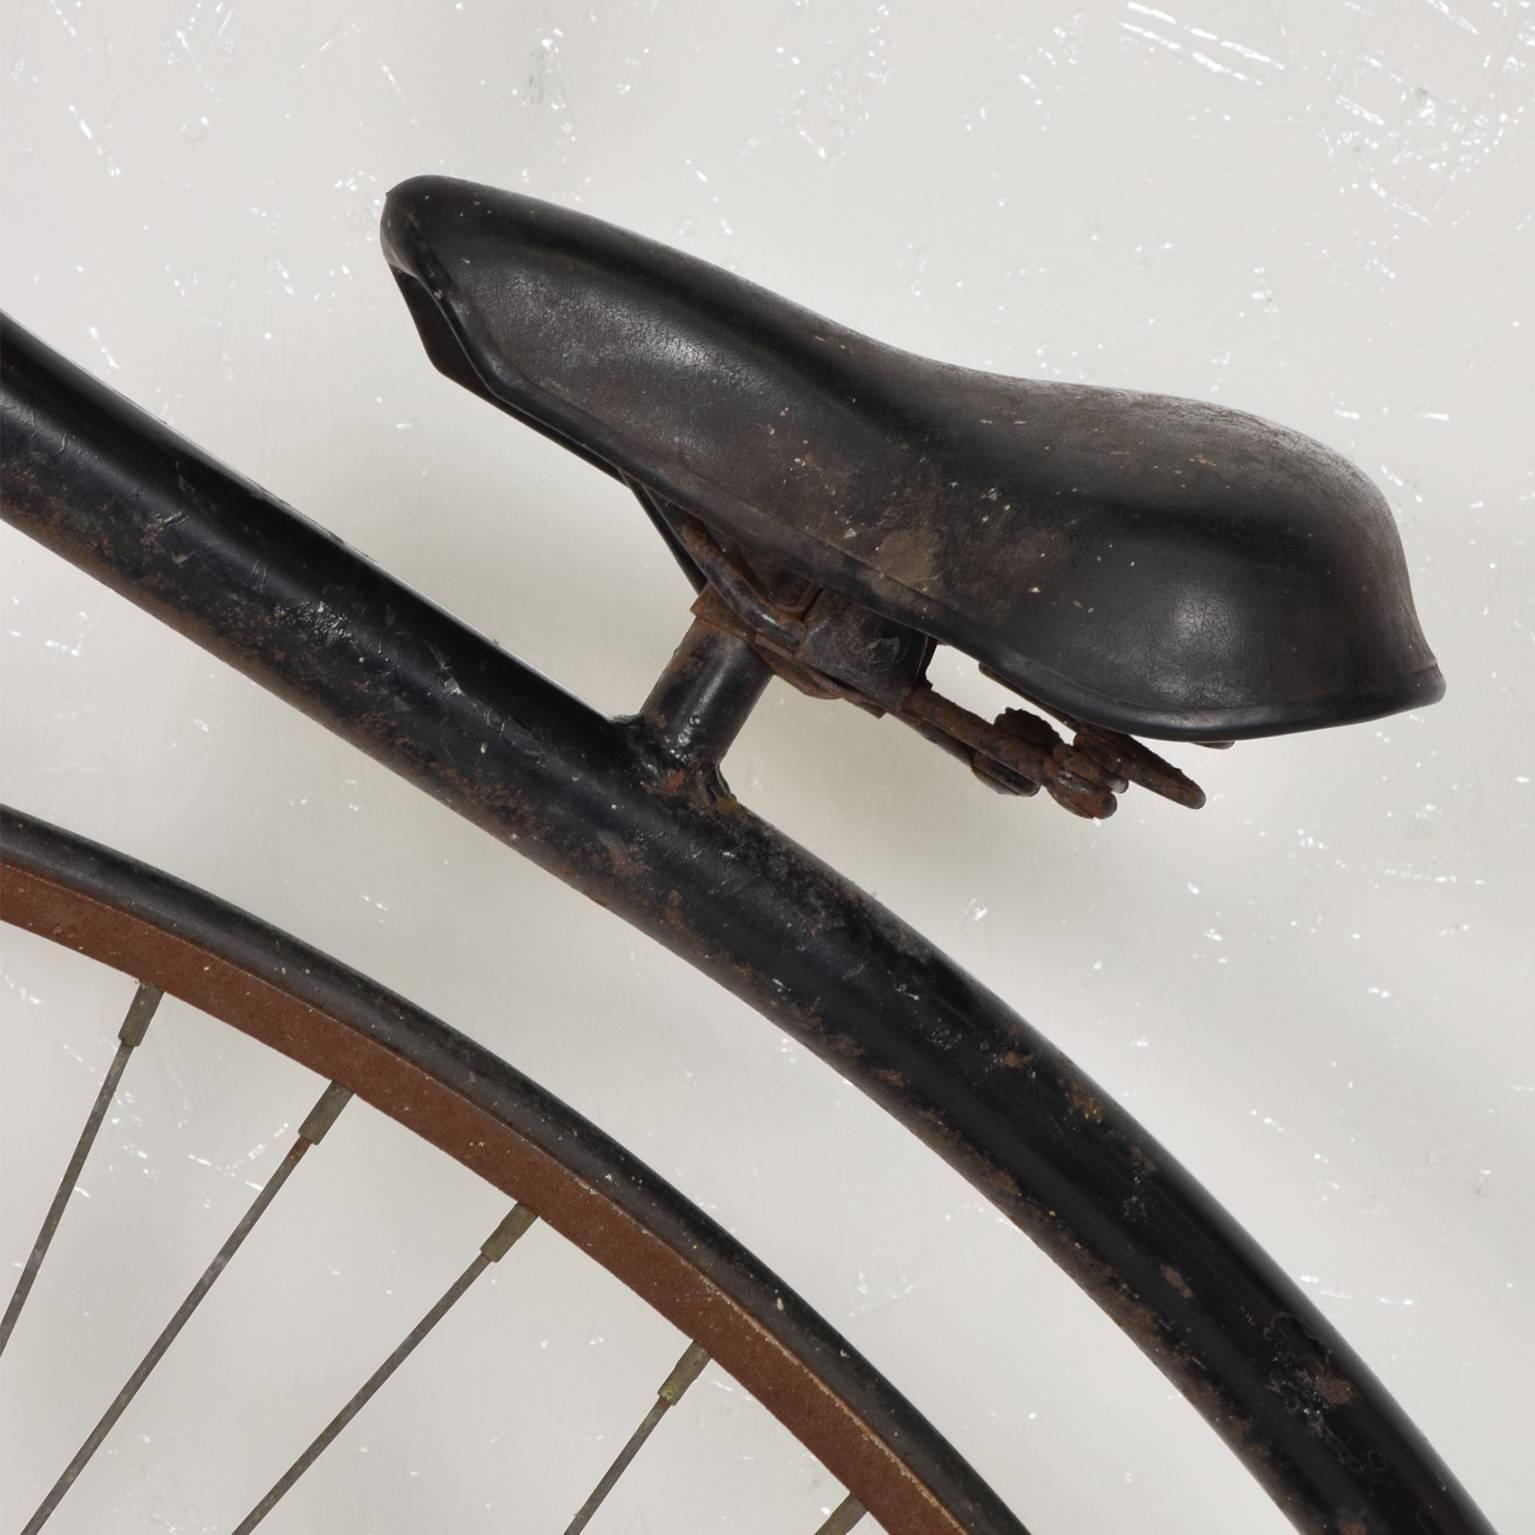 For your consideration an early Boneshaker high wheel bicycle.
Original black paint showing signs of rust.
Original label and seat. 
USA, circa 1870s. 
Dimensions: 60